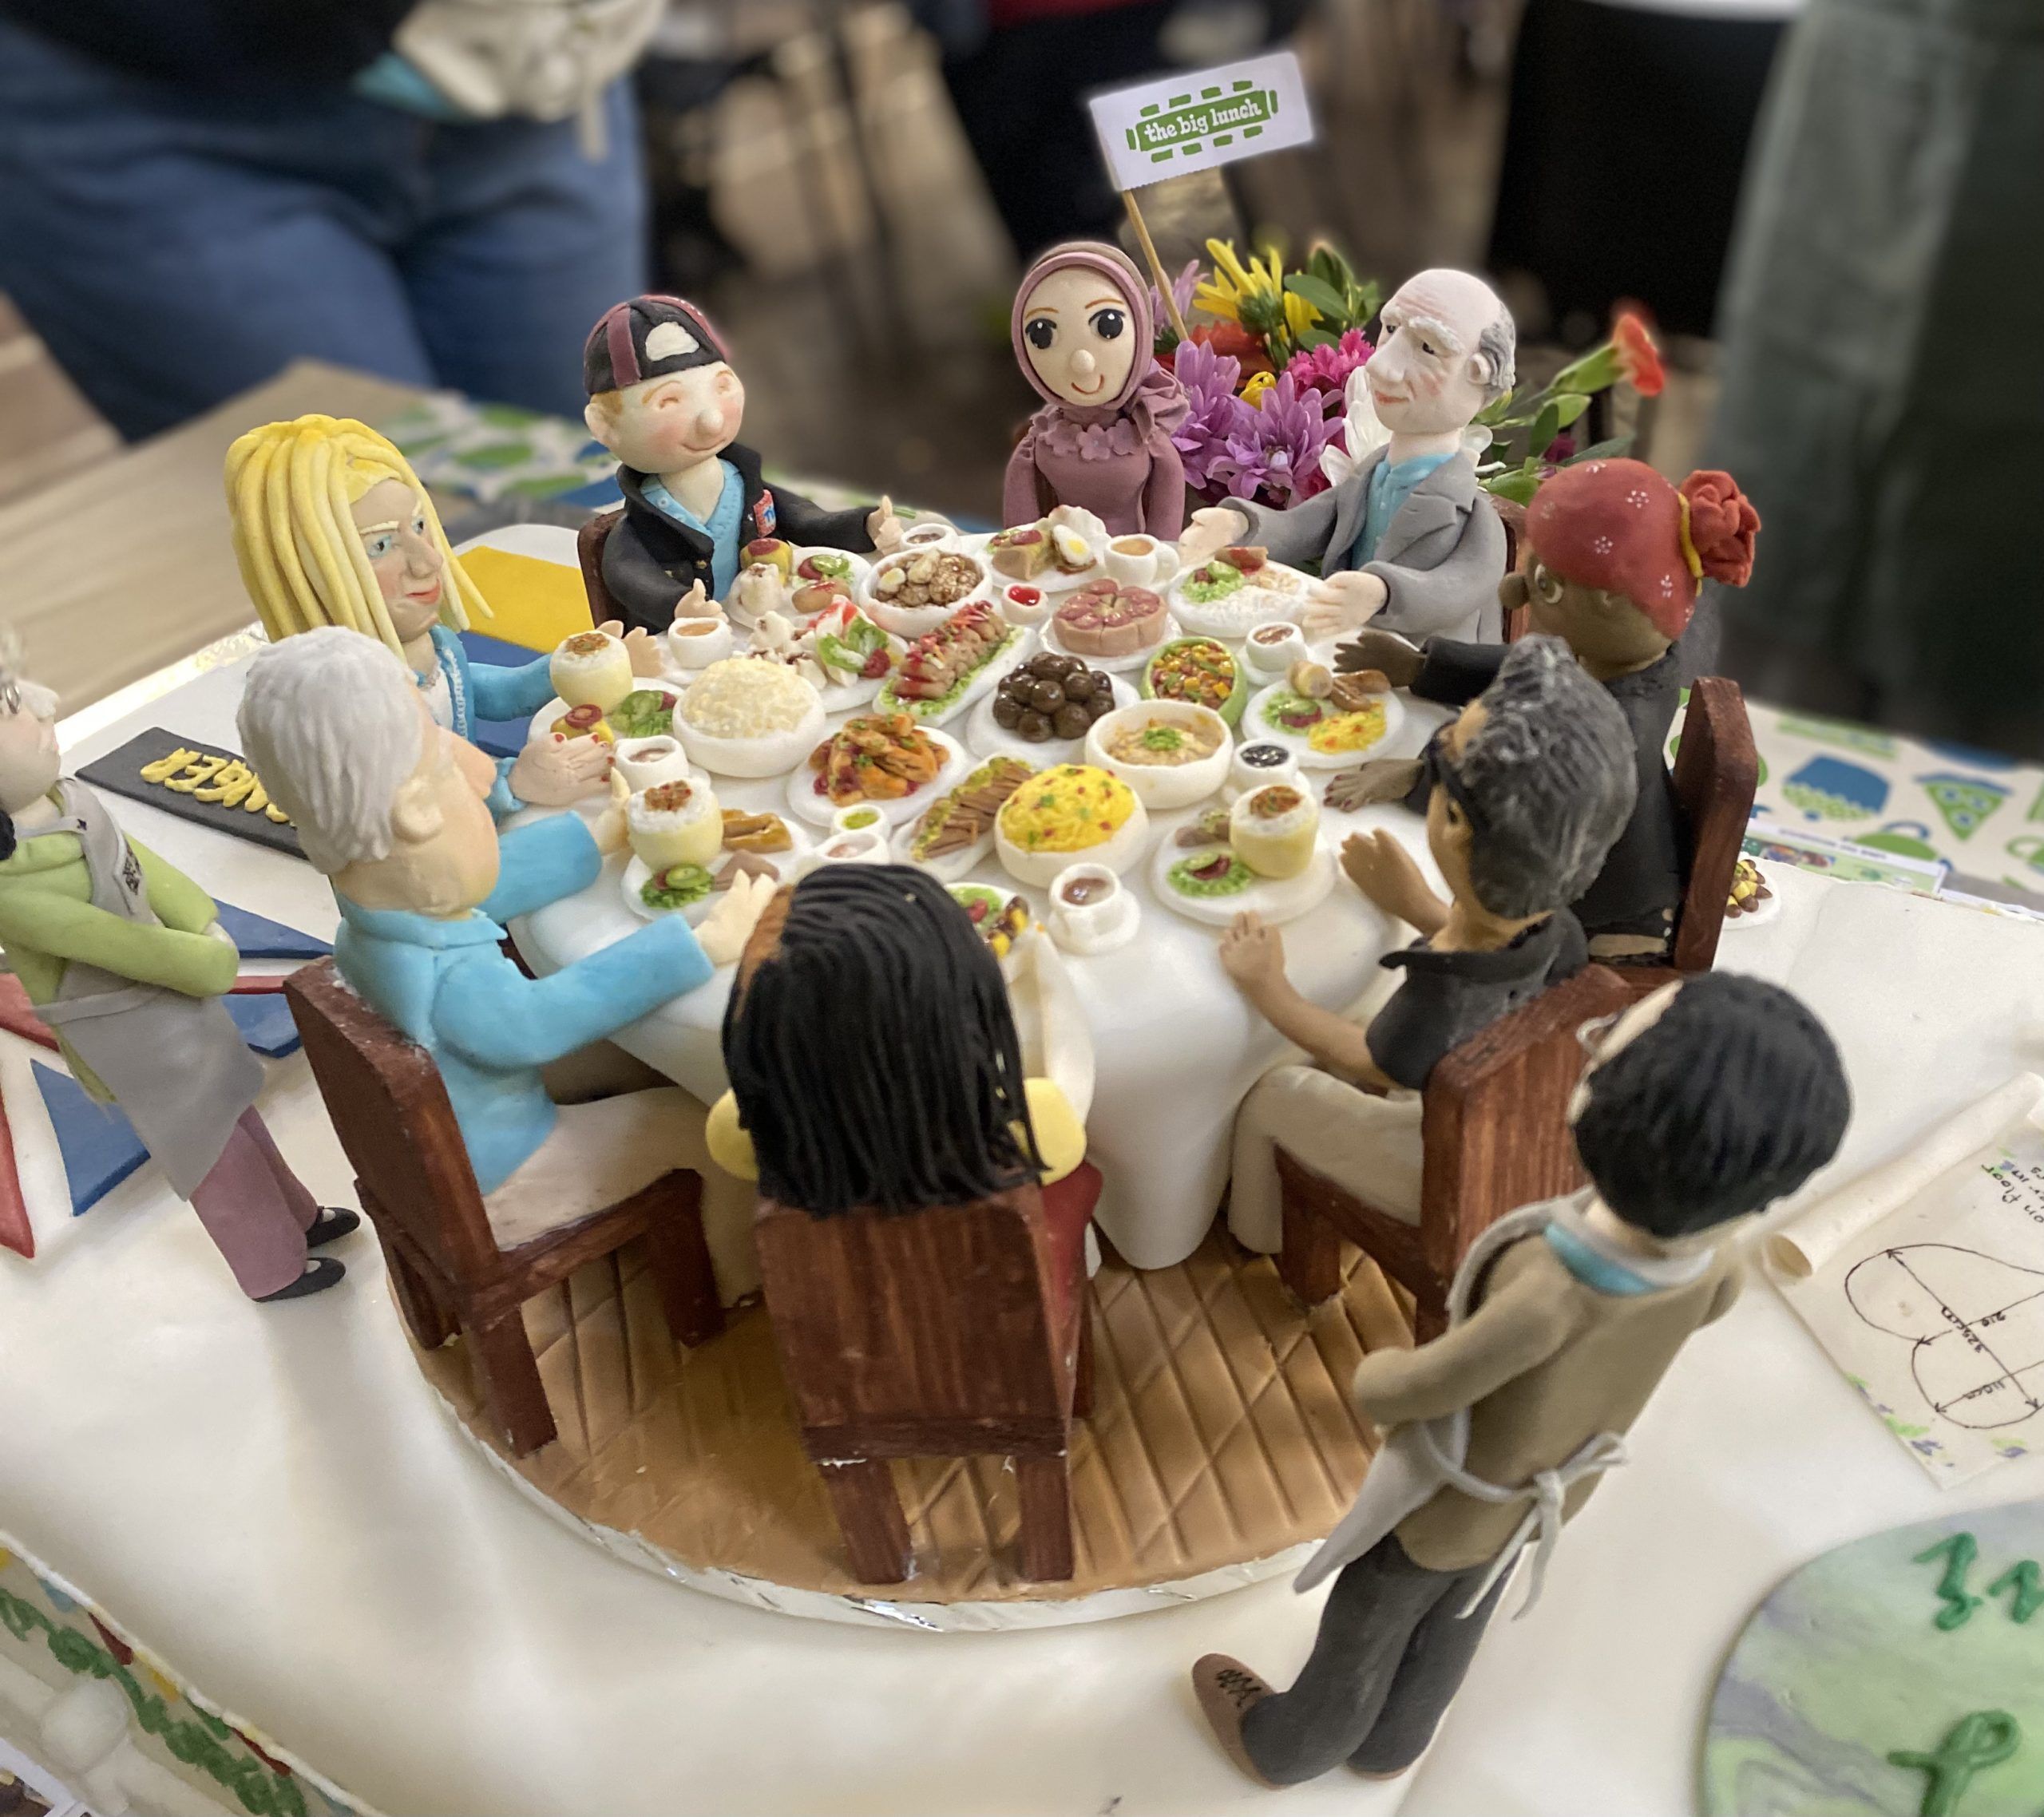 An amazing cake with little figures sitting around a table laden with food and a Big Lunch flag